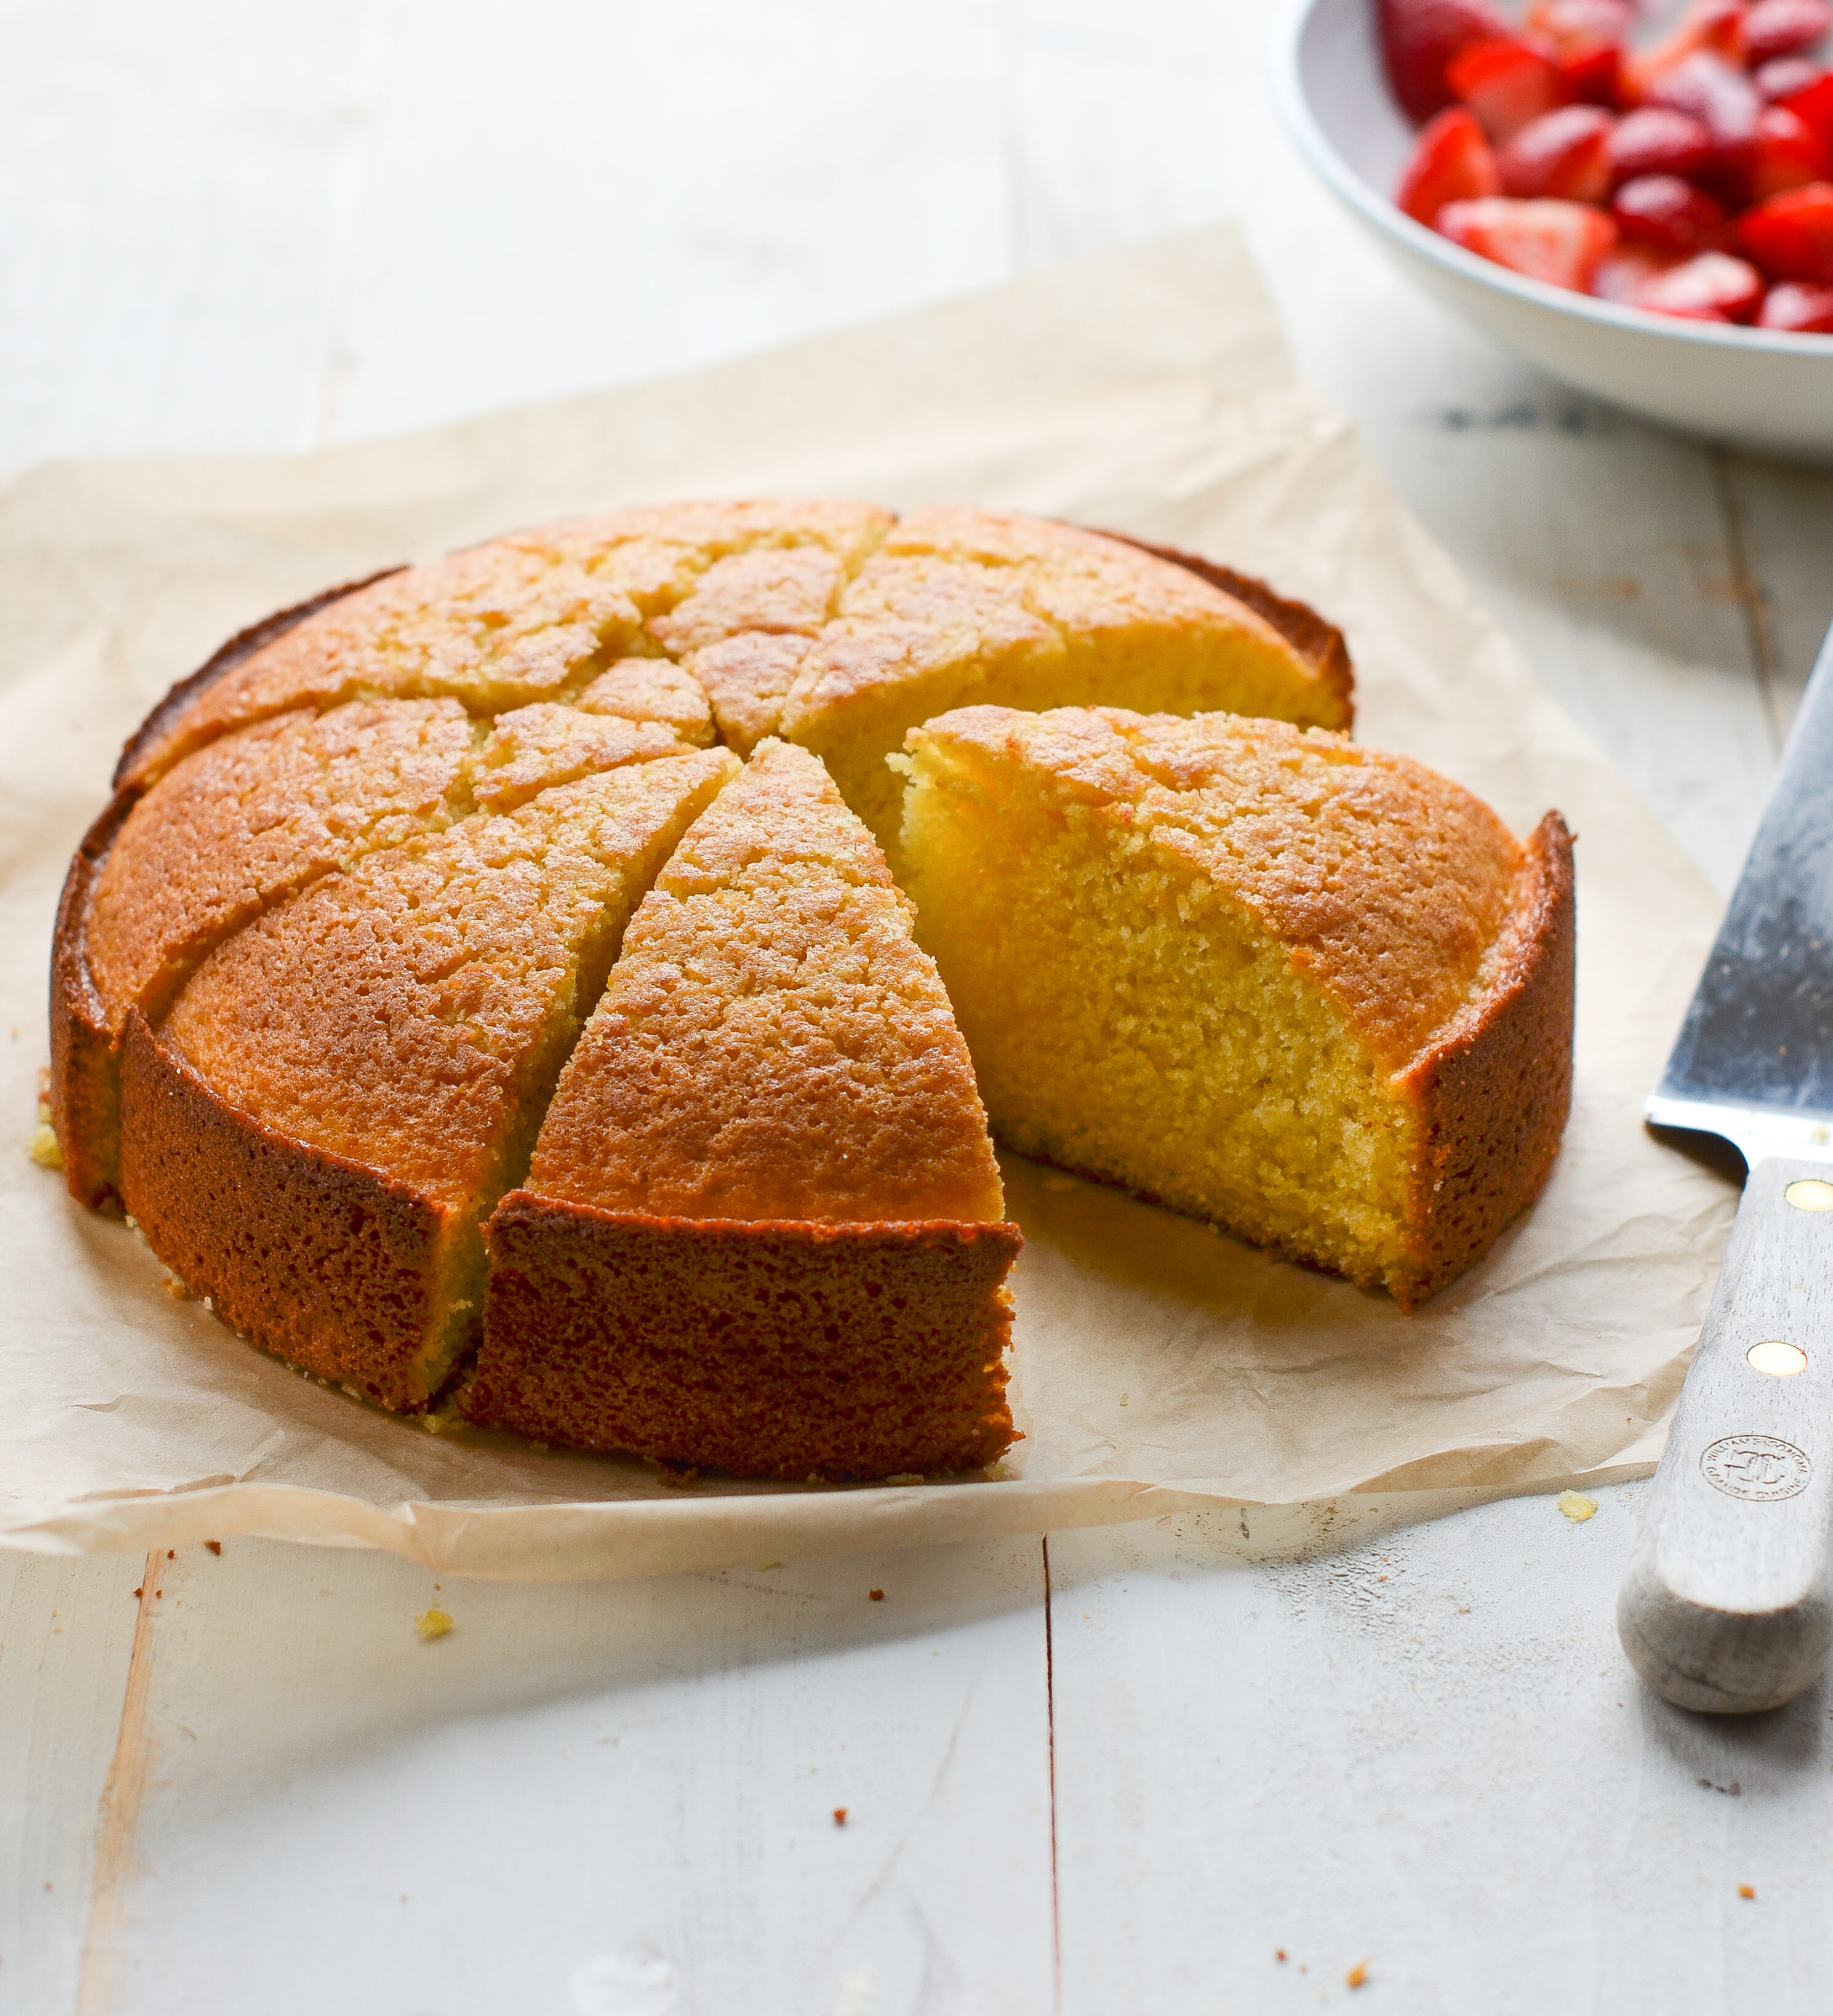 Almond and olive oil cake recipe (great for absolute beginners) - YouTube